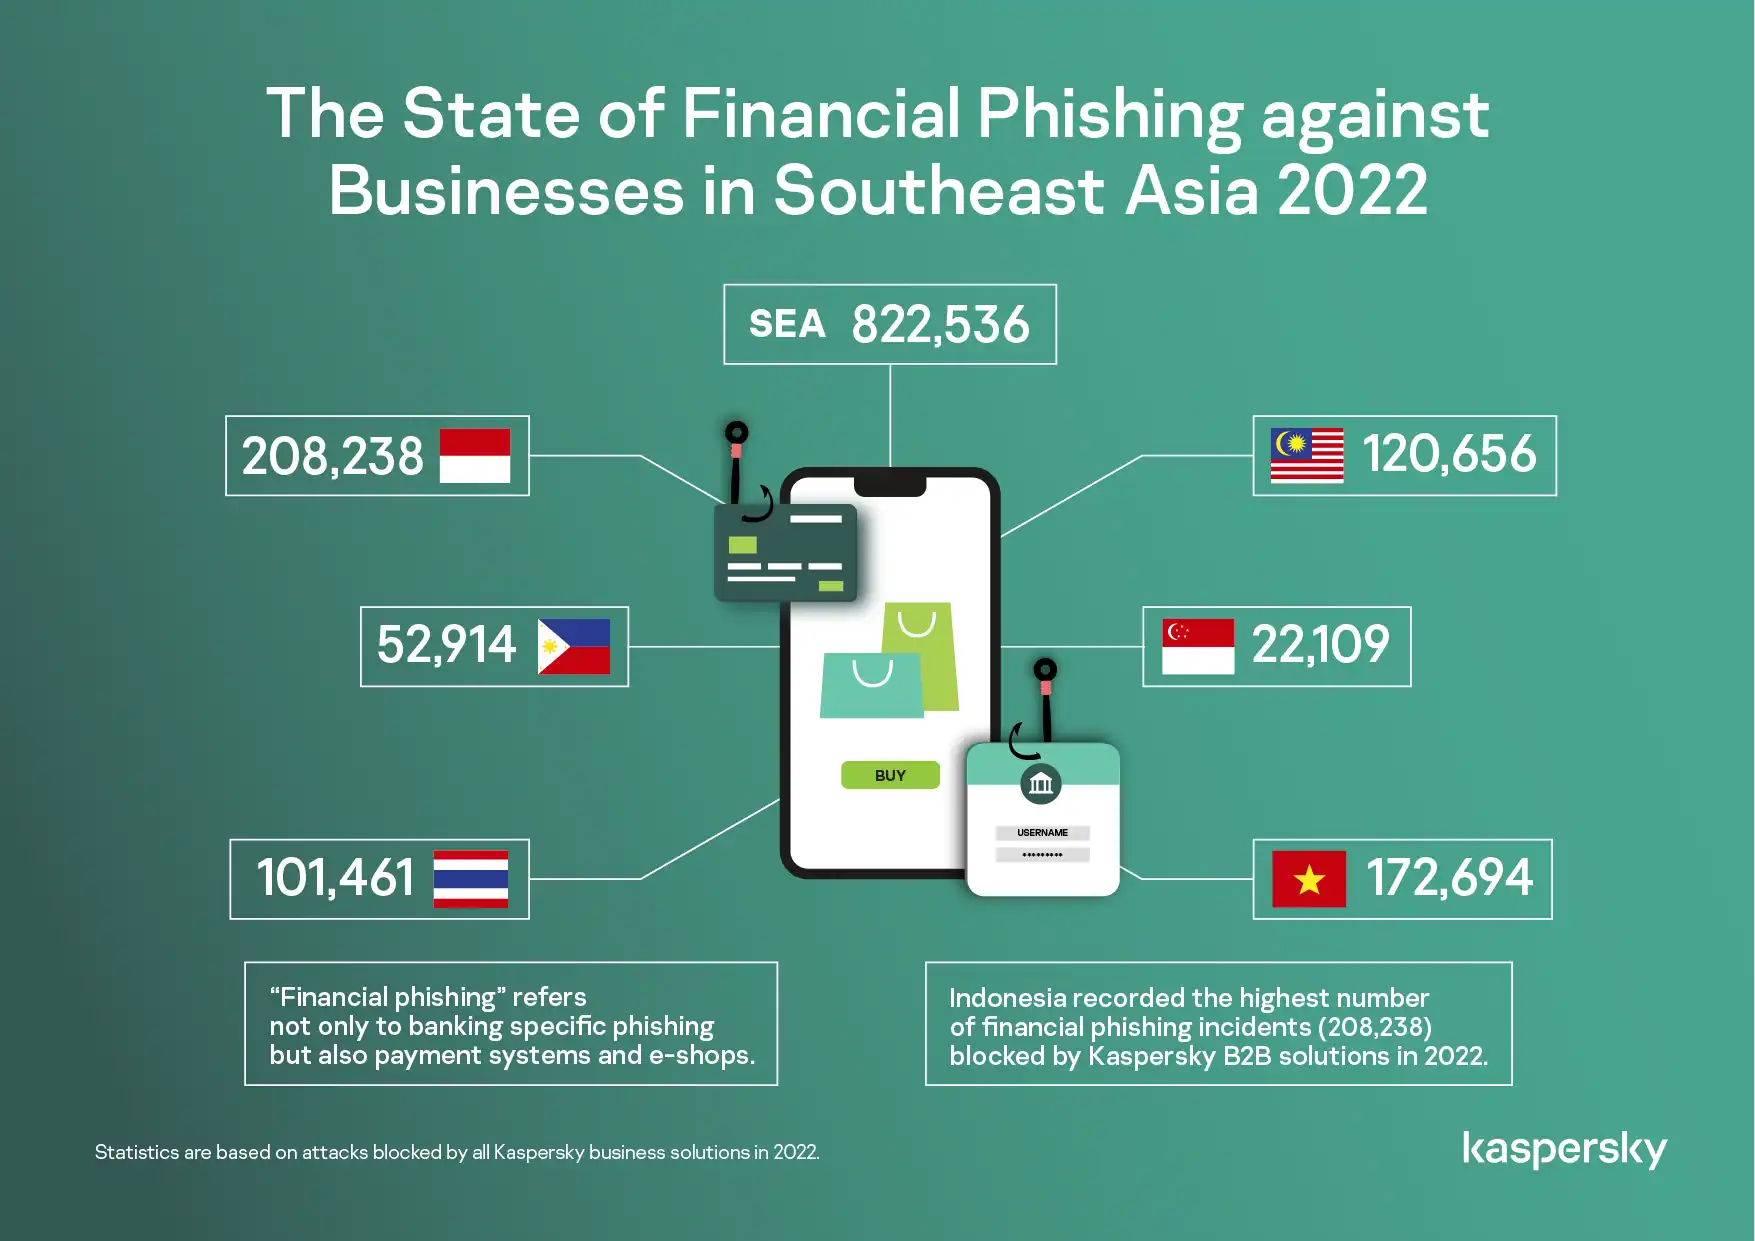 The State of Financial Phishing against Businesses in Southeast Asia 2022